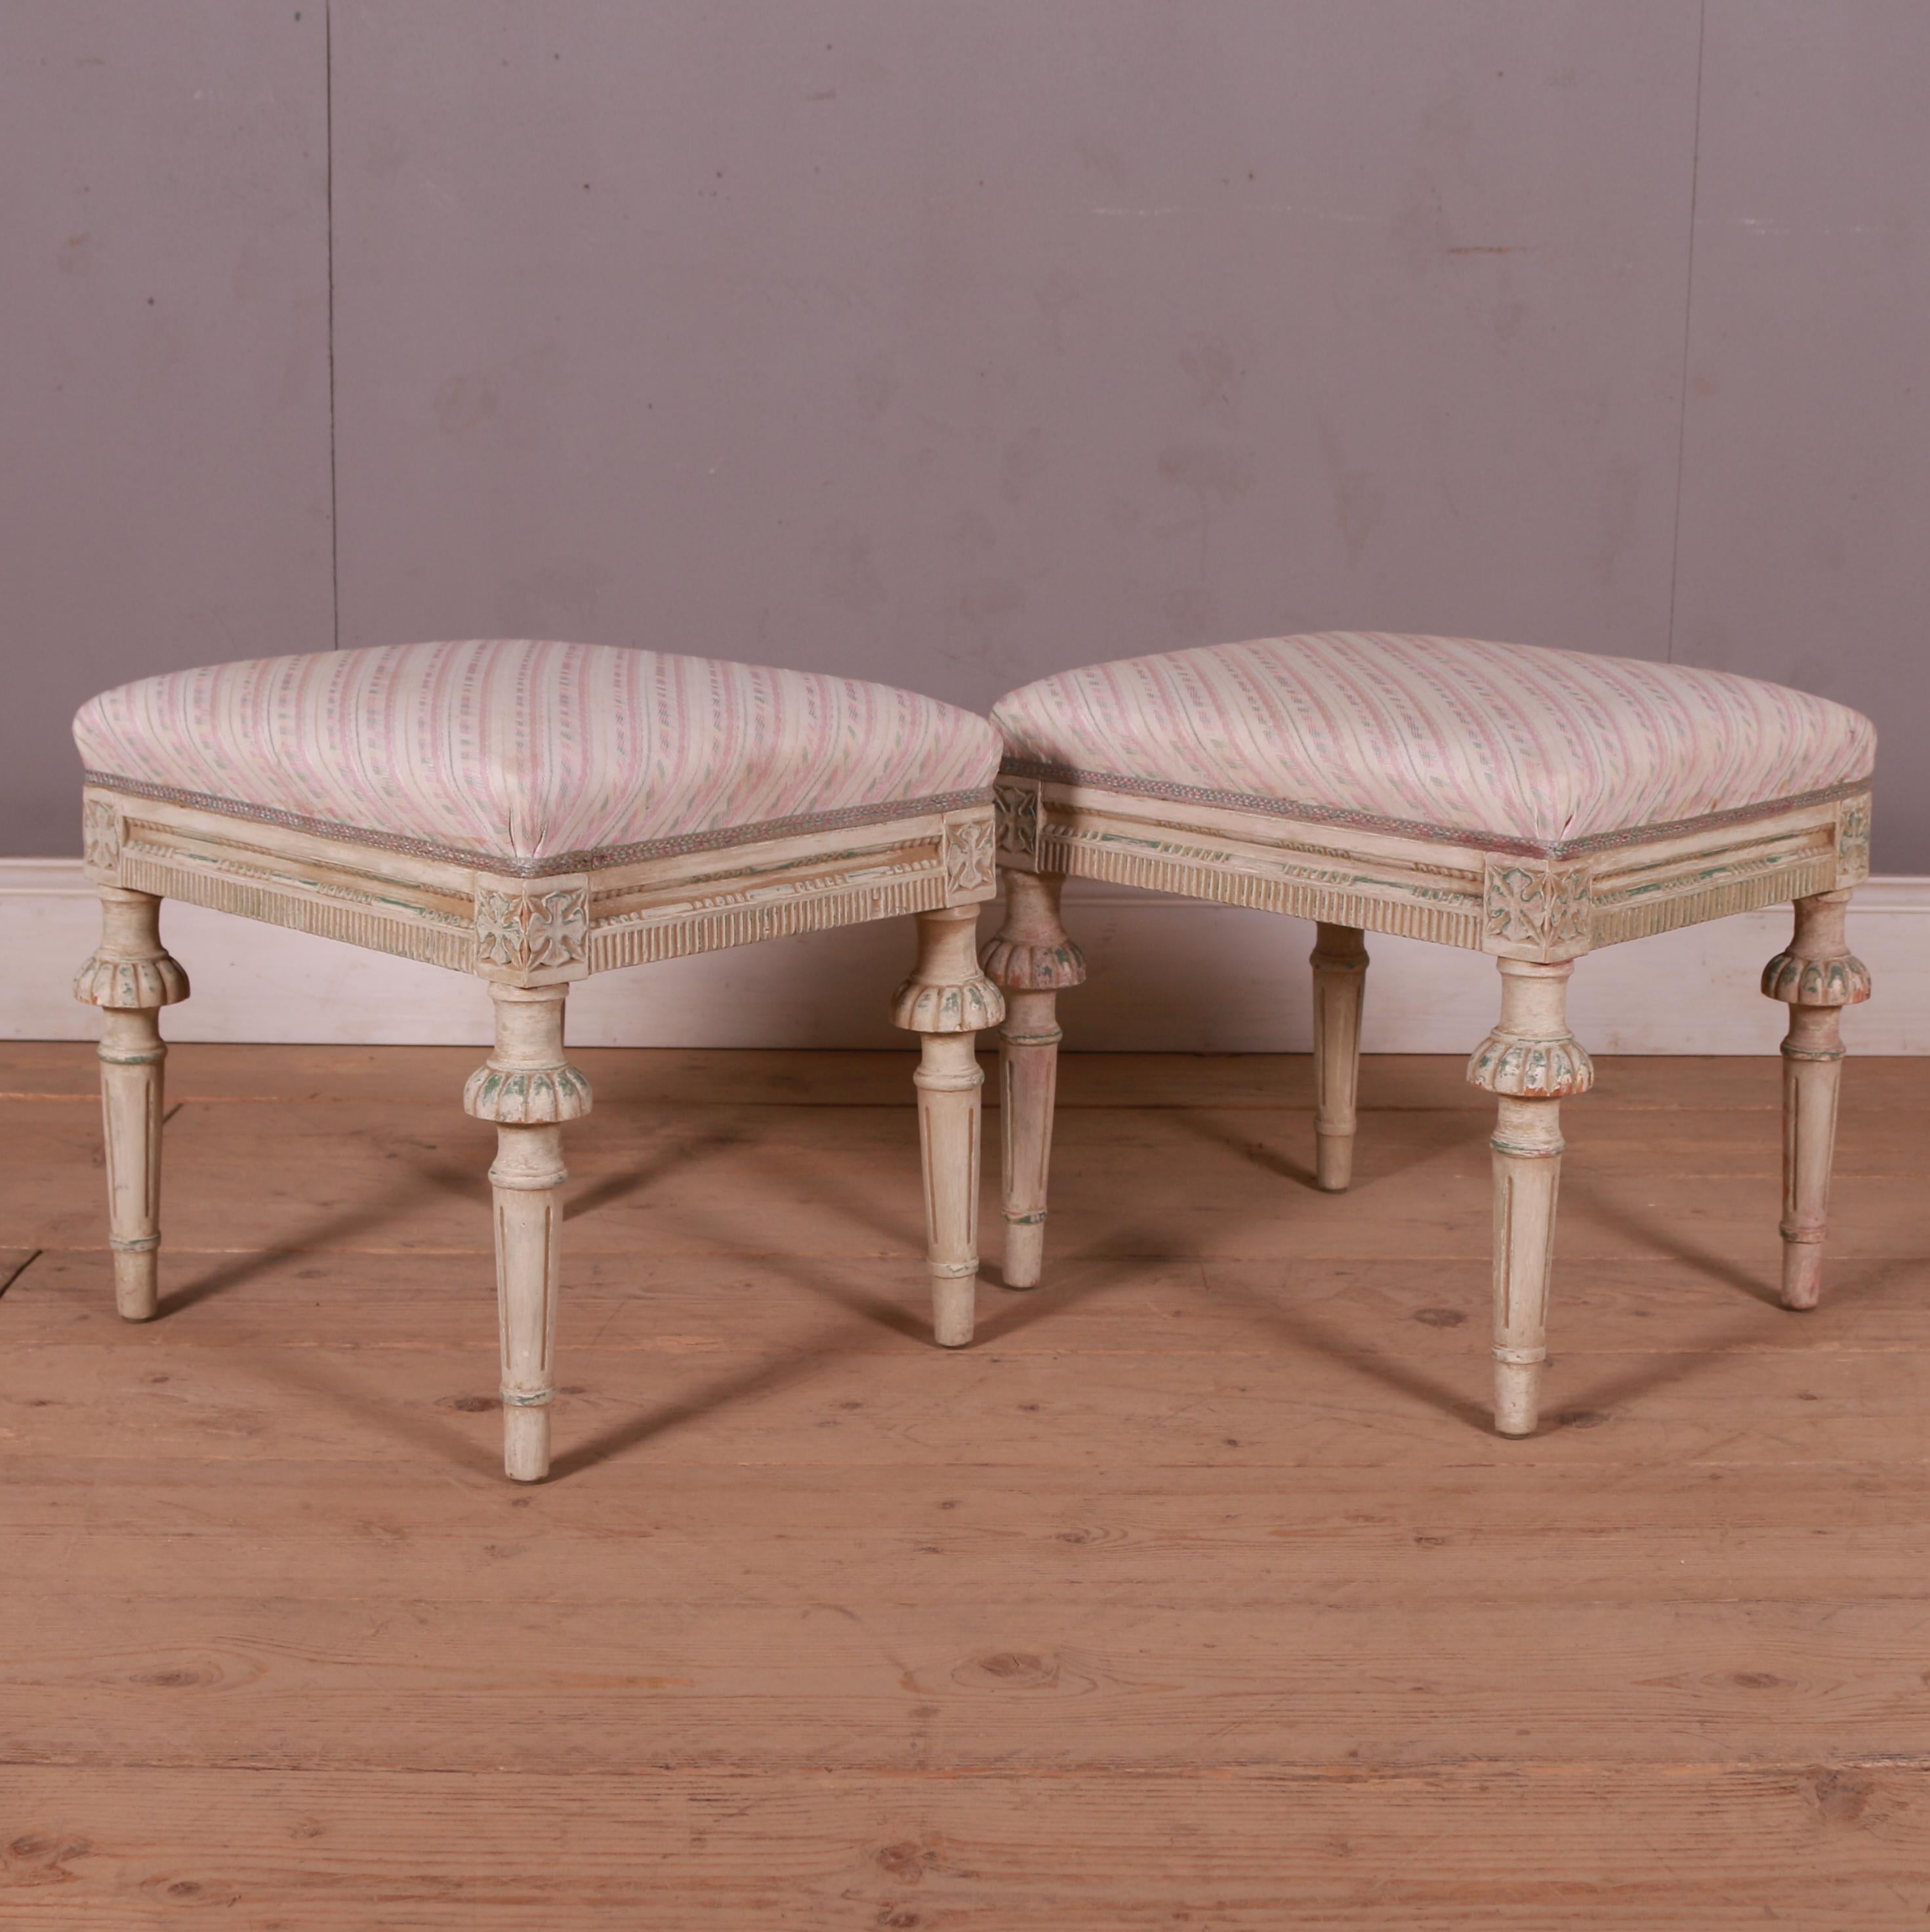 Pair of 19th C Swedish Gustavian style stools. Great decoration to legs and apron. Great worn paint revealing traces of original paint. 1880

These need to be recovered as one of the seats is stained as photographed

Dimensions
20 inches (51